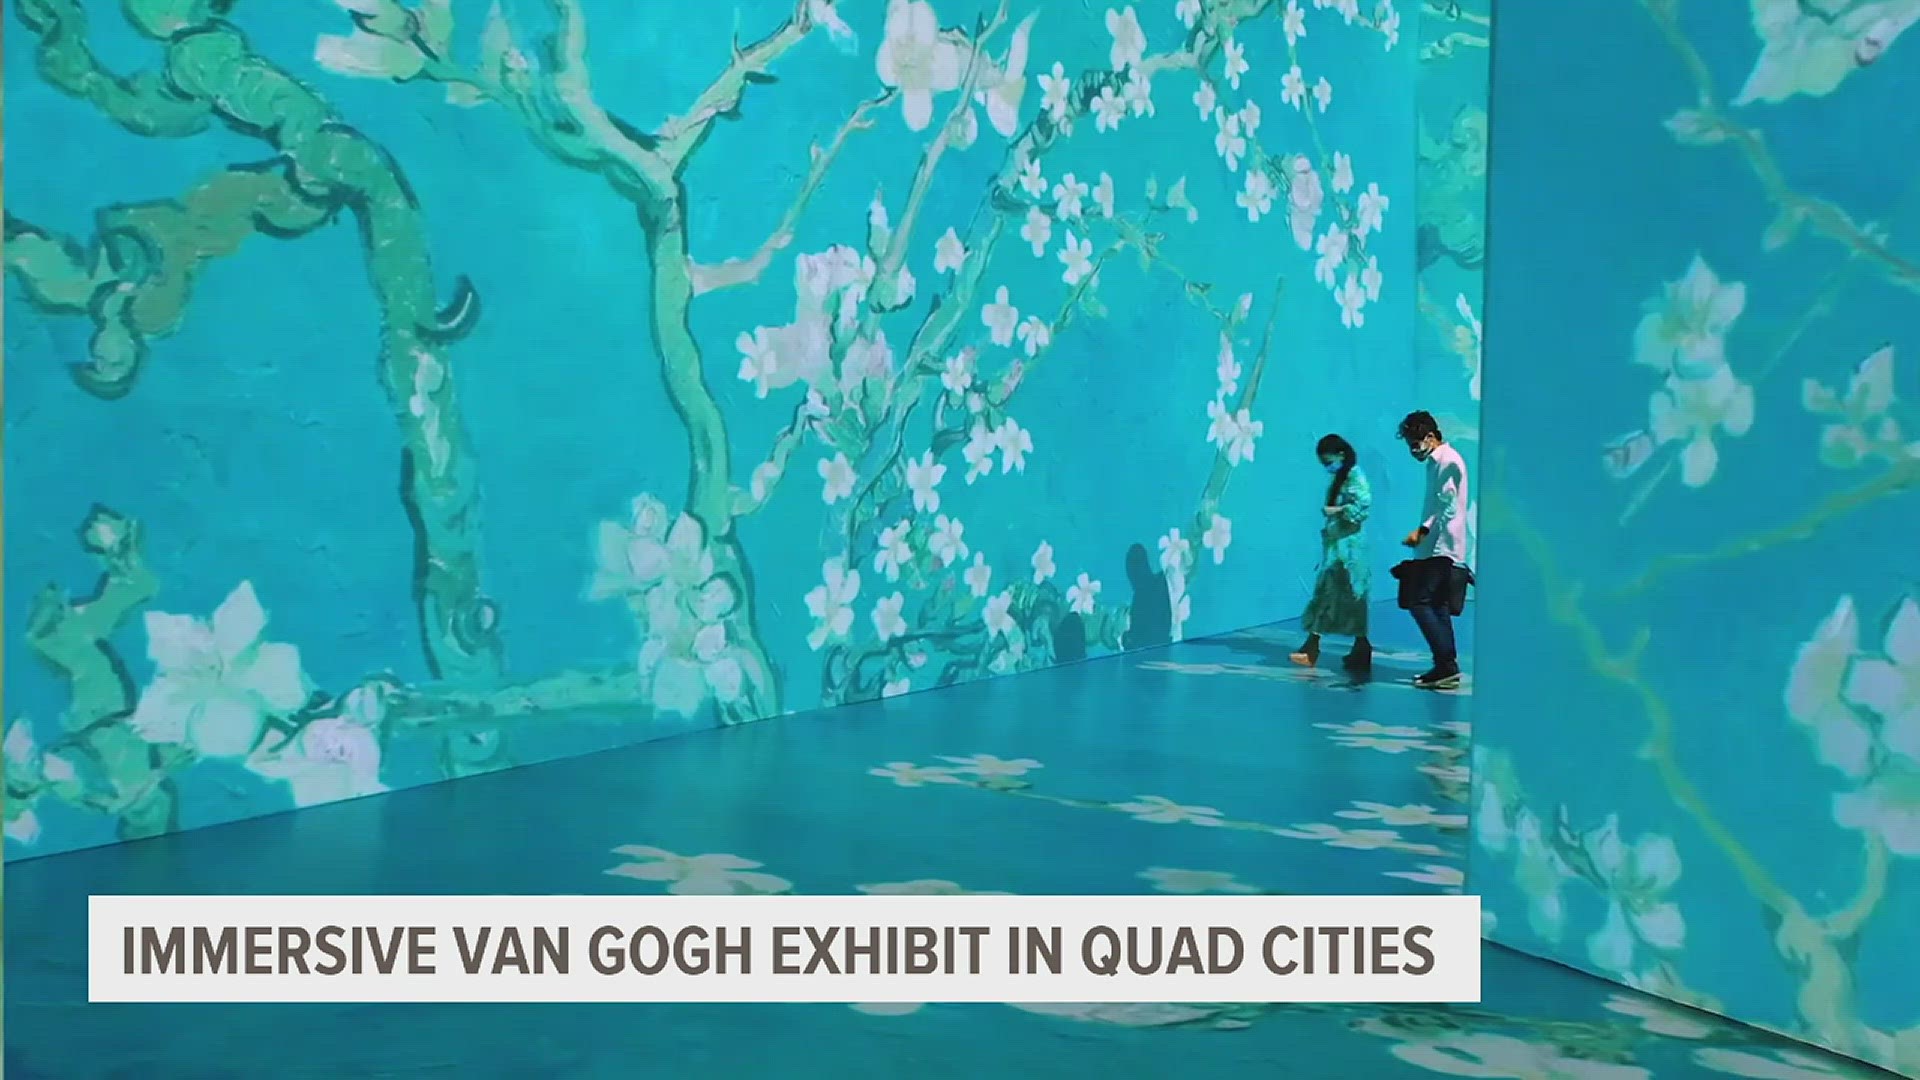 A "dreamlike" experience is waiting for Quad Citizens at this immersive exhibit at the RiverCenter.